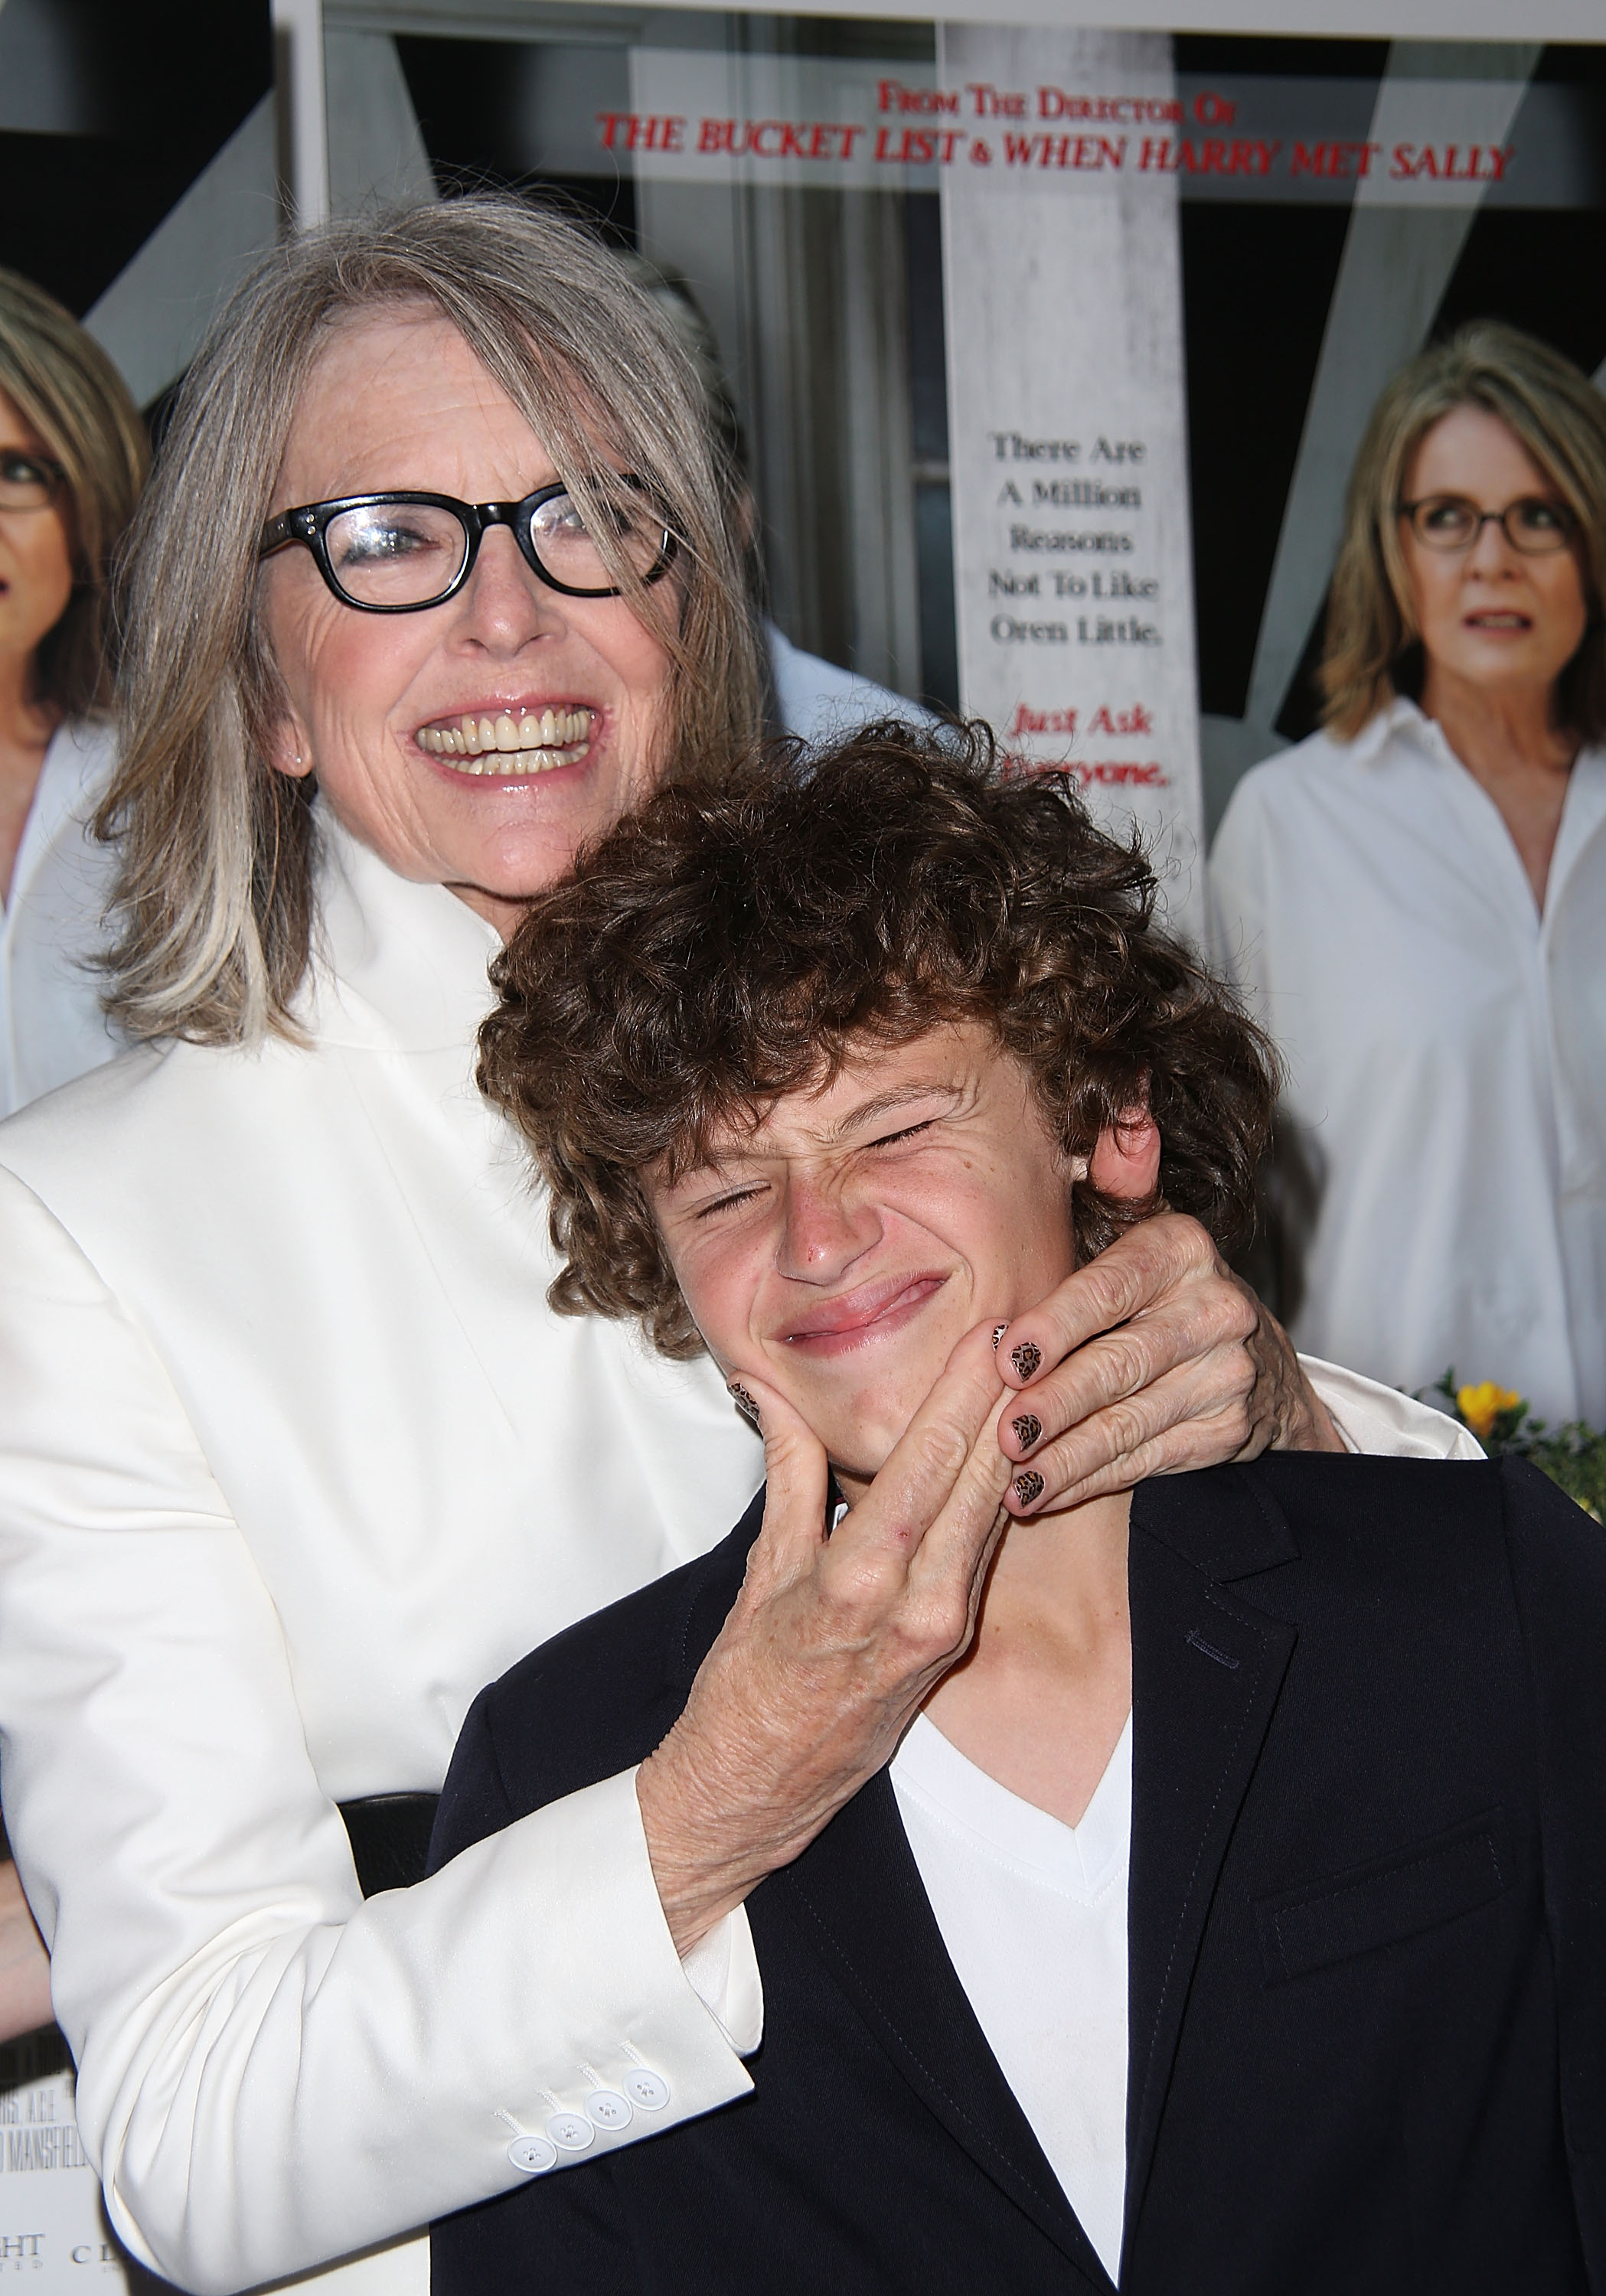 Diane and Duke Keaton at the premiere of "And So It Goes" in East Hampton, 2014 | Source: Getty Images